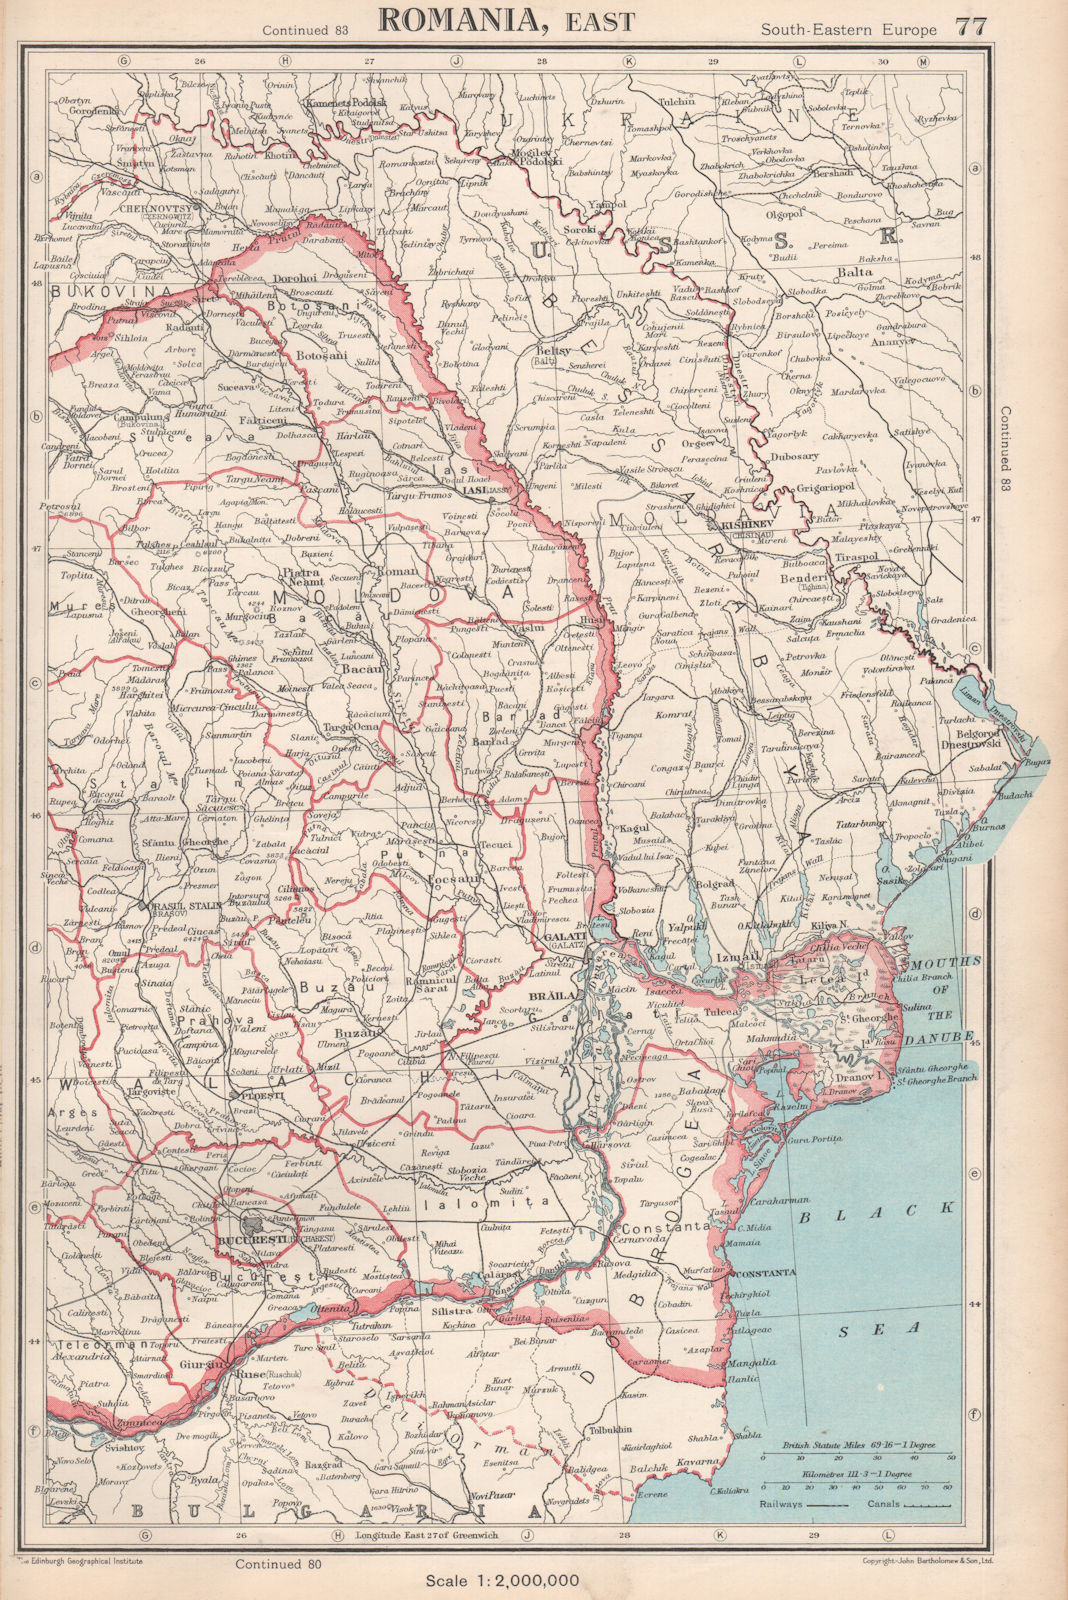 Associate Product ROMANIA EAST. showing judeţ/judets/counties. BARTHOLOMEW 1952 old vintage map